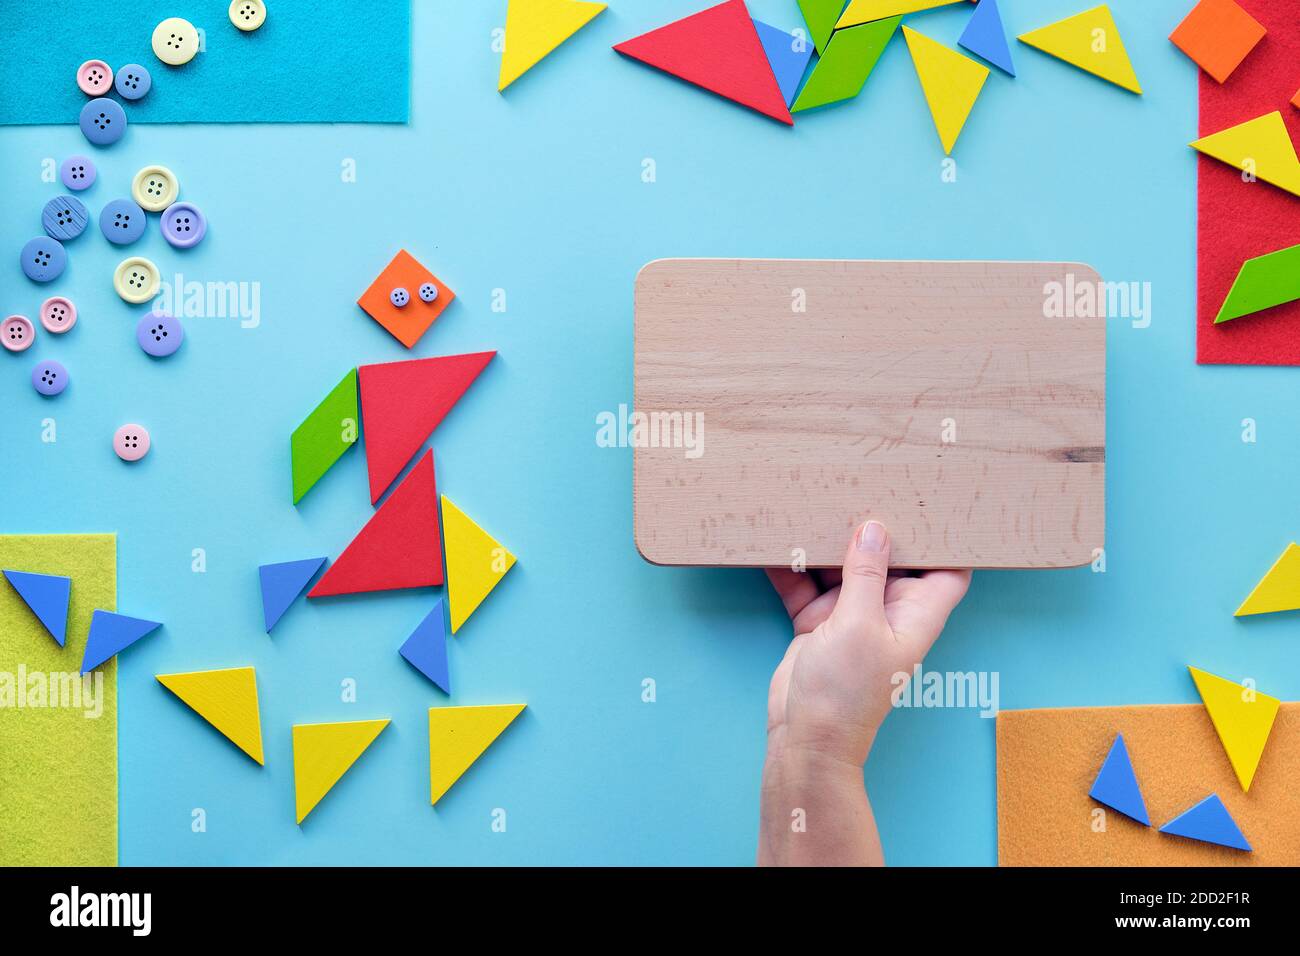 Creative design for Autism World day with tangram puzzle triangles, pictogram and hand with board Stock Photo